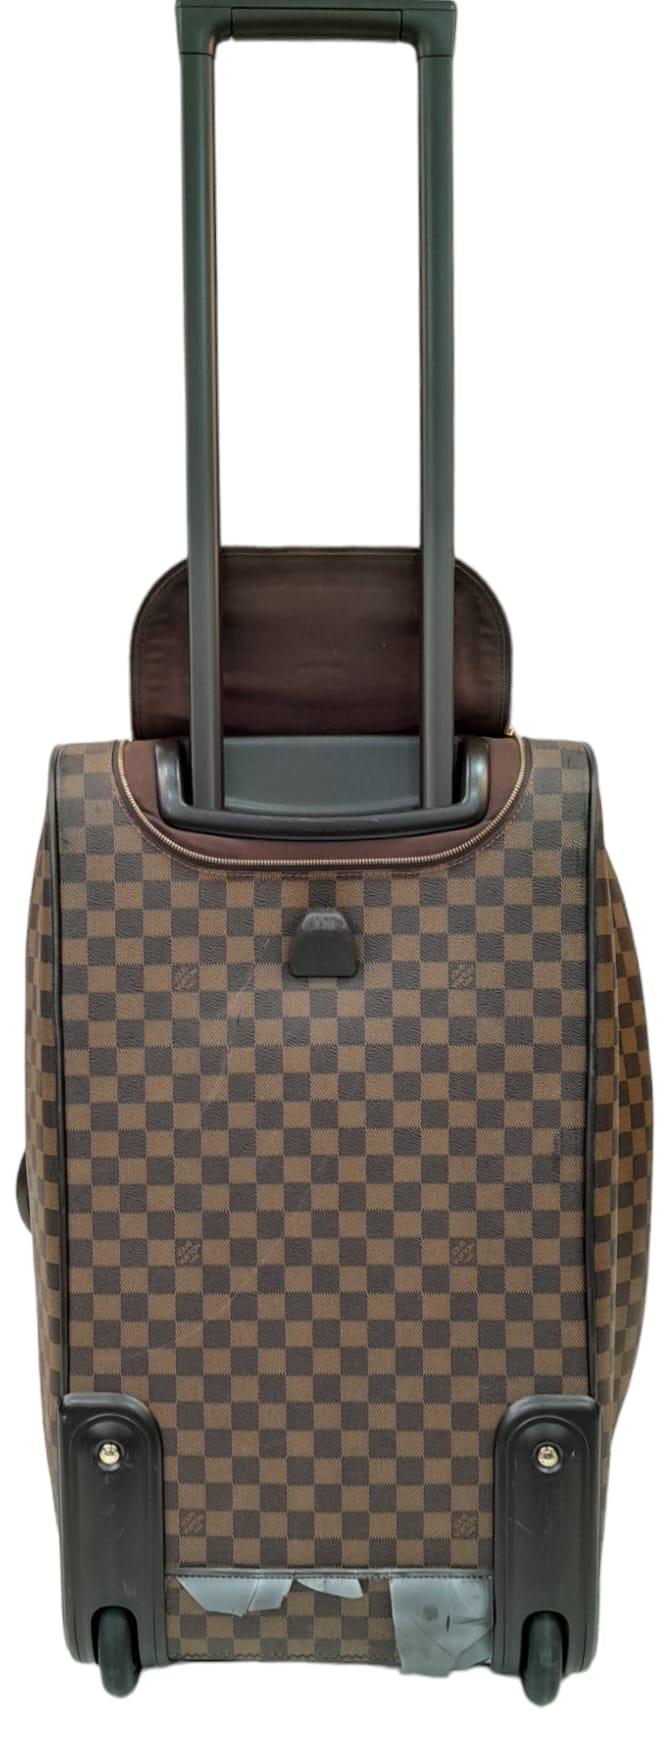 A Louis Vuitton Damier Ebene Eole Convertible Travel Bag. Leather exterior with gold-toned hardware, - Image 5 of 10